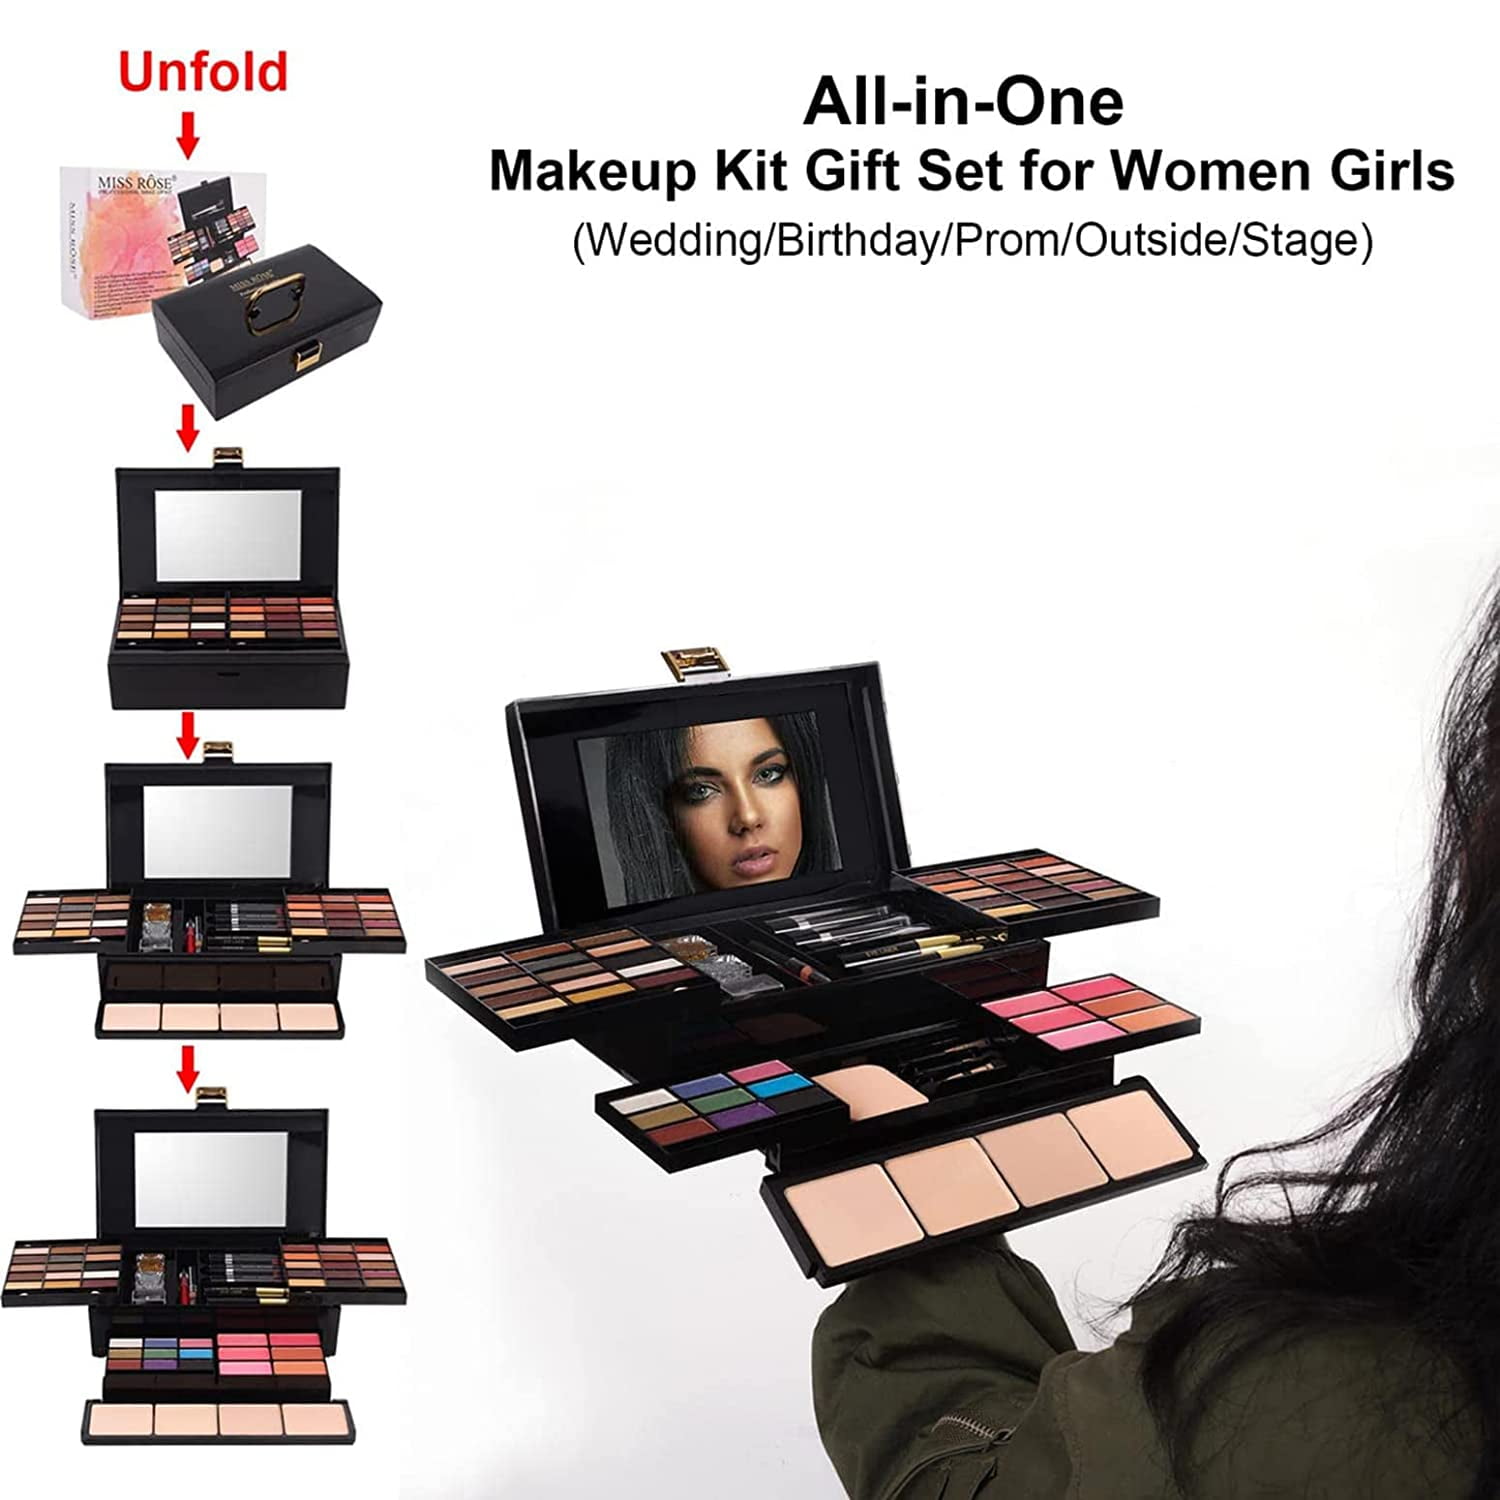 58 colors Professional Makeup Kit for Women, All In One Full Makeup Gift  Set for Women Girls Beginner with Eye Shadow Blush, Lipstick, Compact  Powder